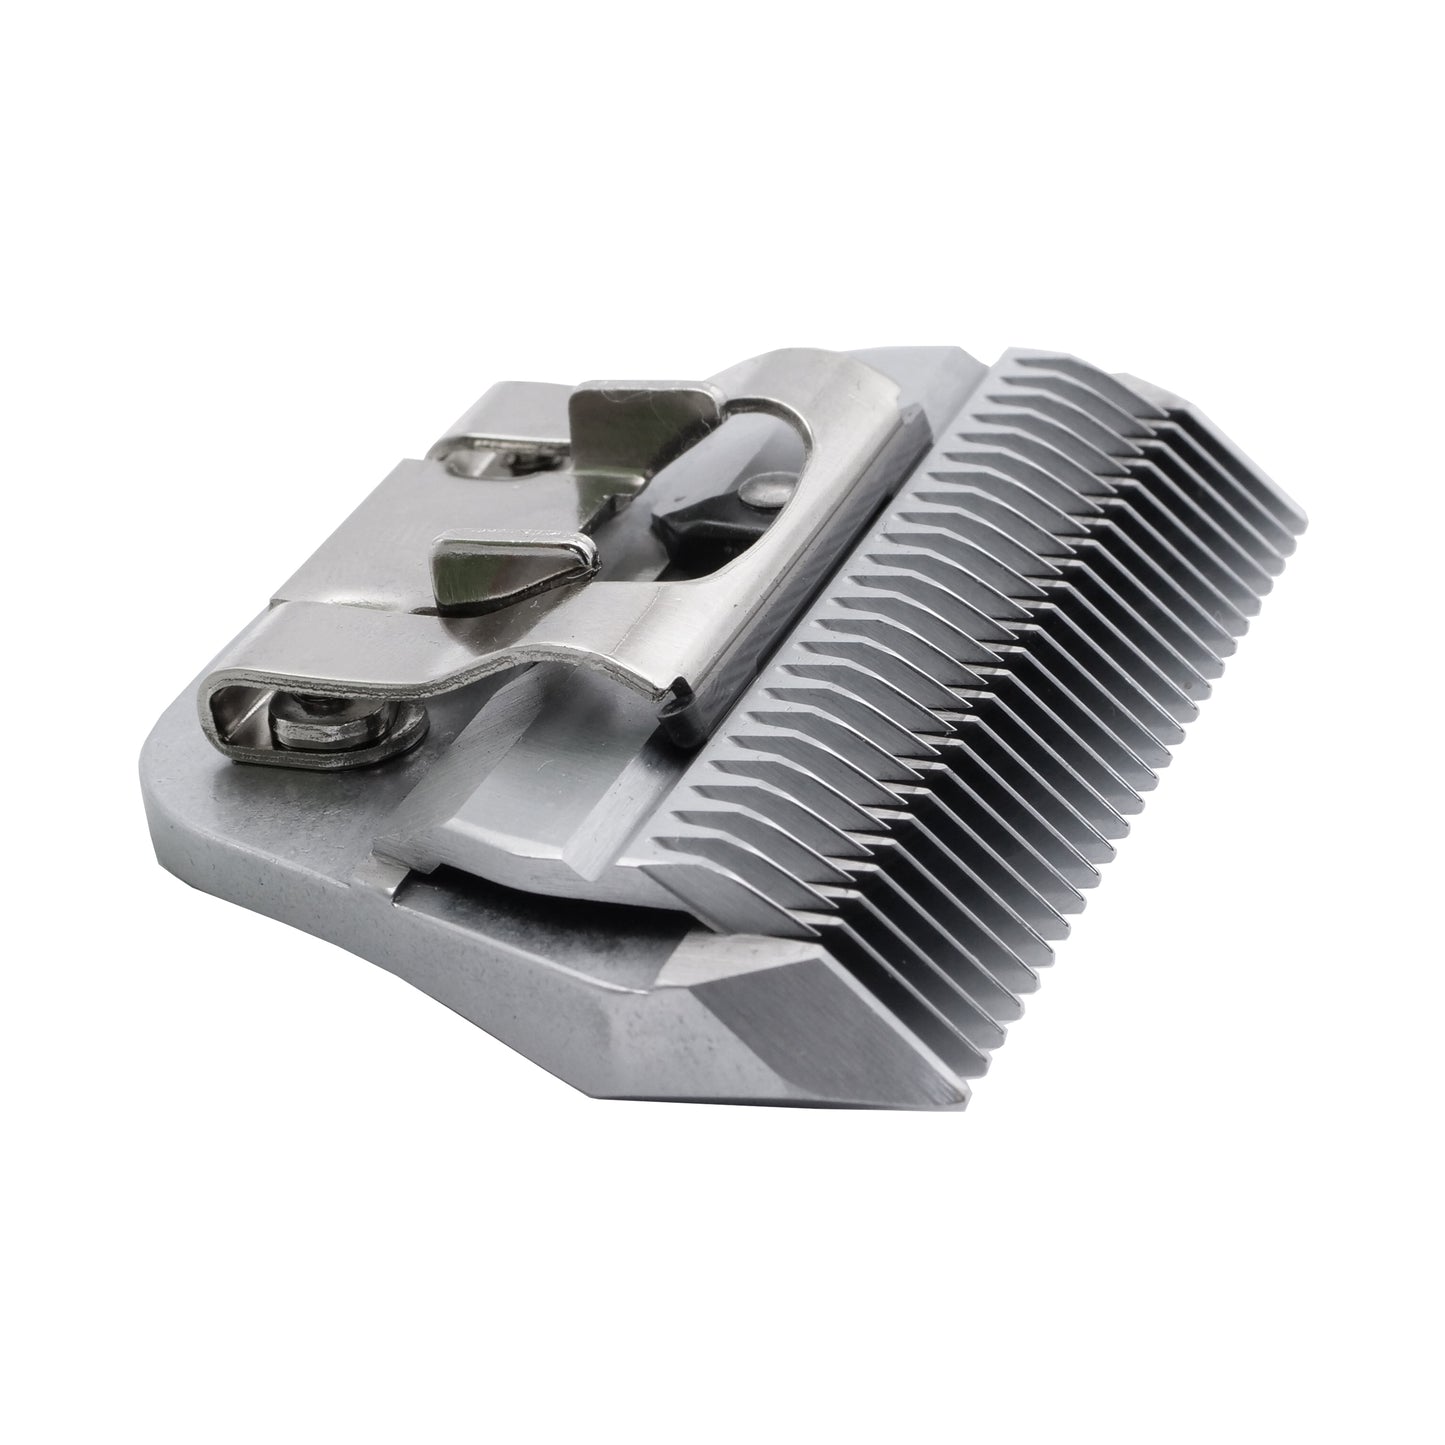 Artero Wide Clipper Blade #4FW for Professional Pet Grooming saves time. These wide clipper blades provide faster cuts avoiding correcting uneven textures and markings. Works with A5 clippers including Artero, Andis, Moser, Heiniger, Oster, and Aesculap Fav5 and Fav5 CL models.